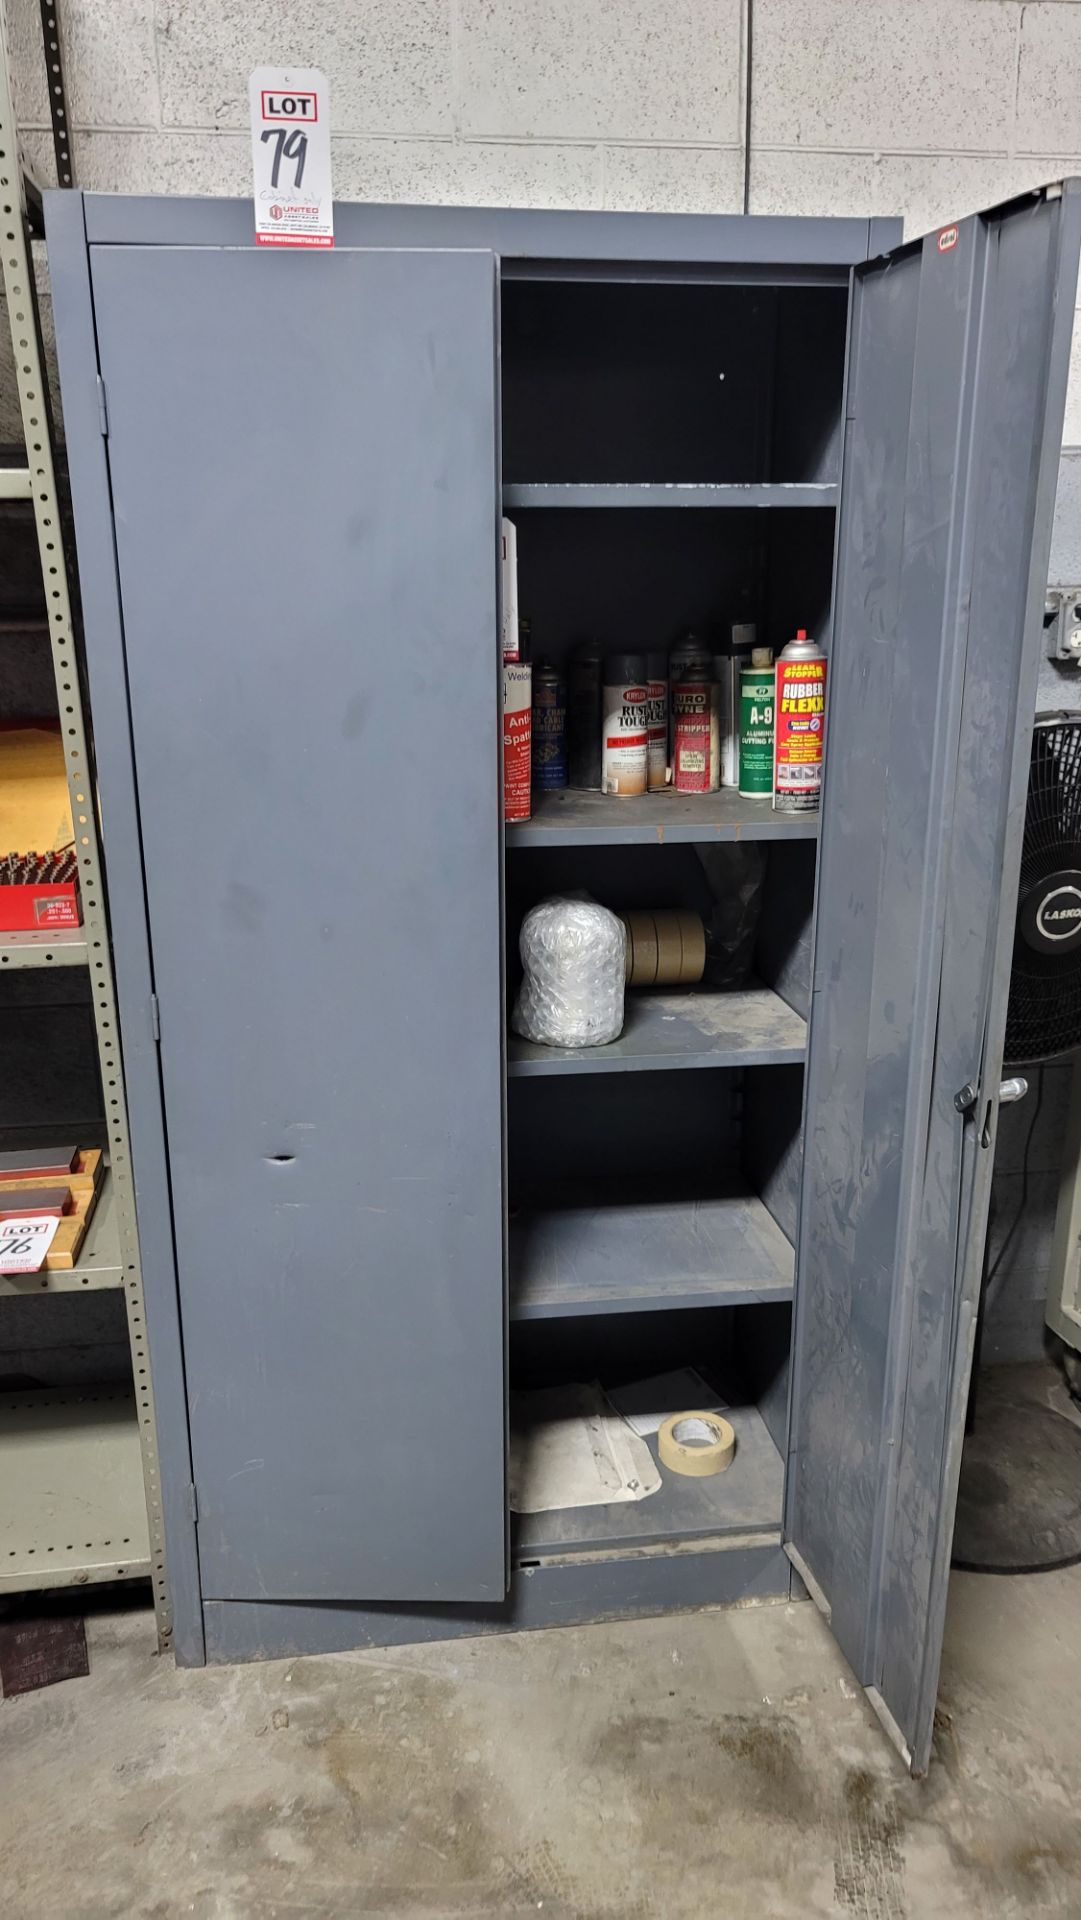 2-DOOR STORAGE CABINET, 3' X 18" X 6', CONTENTS NOT INCLUDED, (LOCATION: 2174 W 2300 S)